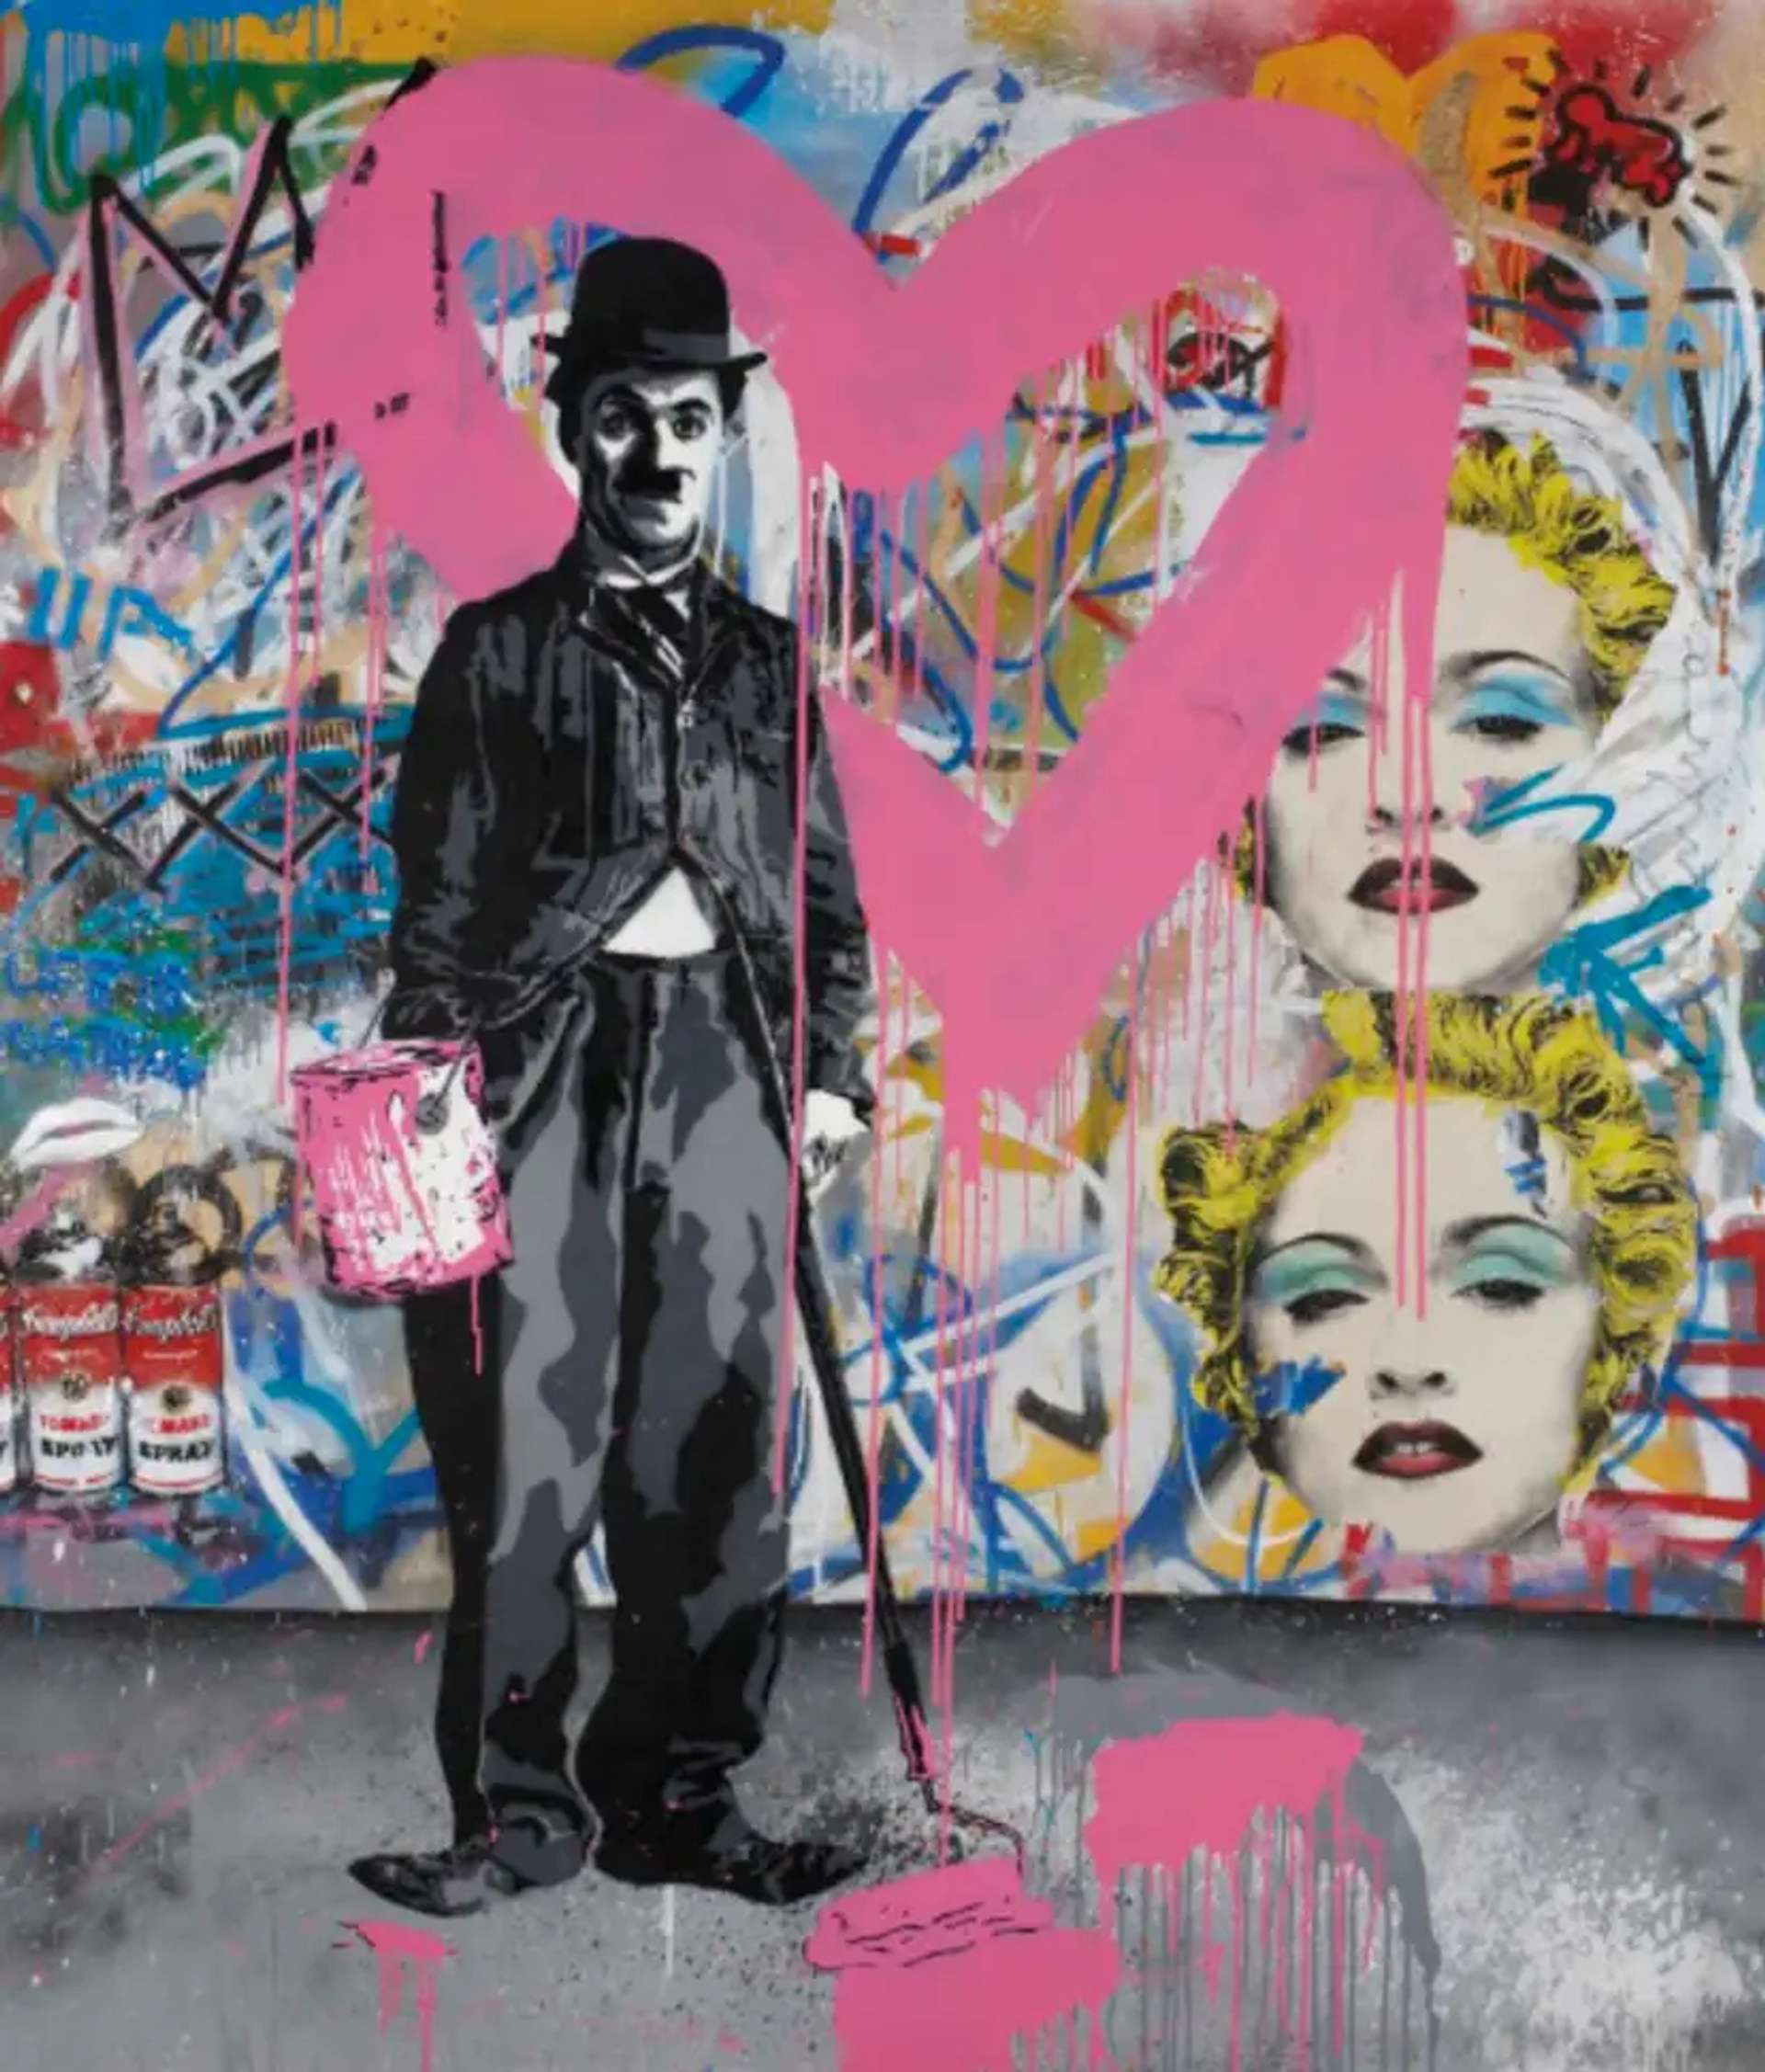 A graffiti-styled artwork depicting a stencilled image of celebrity Charlie Chaplin, holding an open can of pink paint. The artwork is set against a graffiti-covered wall adorned with stencilled portraits of Madonna and a prominent pink heart outline.